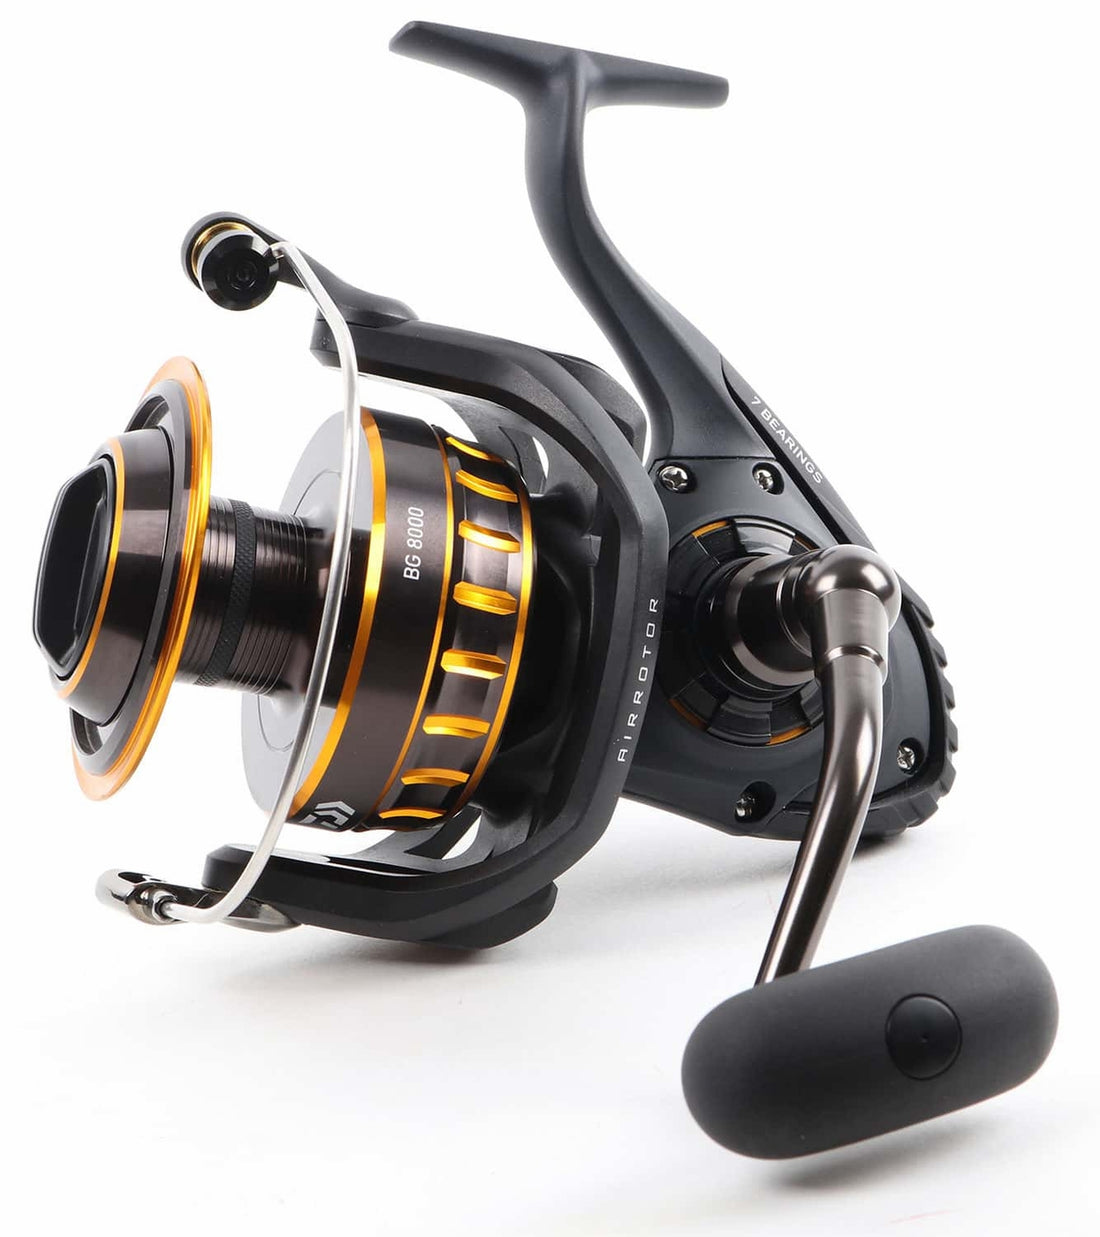 Yaoping Spinning Reel, Stainless Bb Fishing Reel, Spool for Saltwater and Freshwater Fishing Line Wheel, Size: 3000